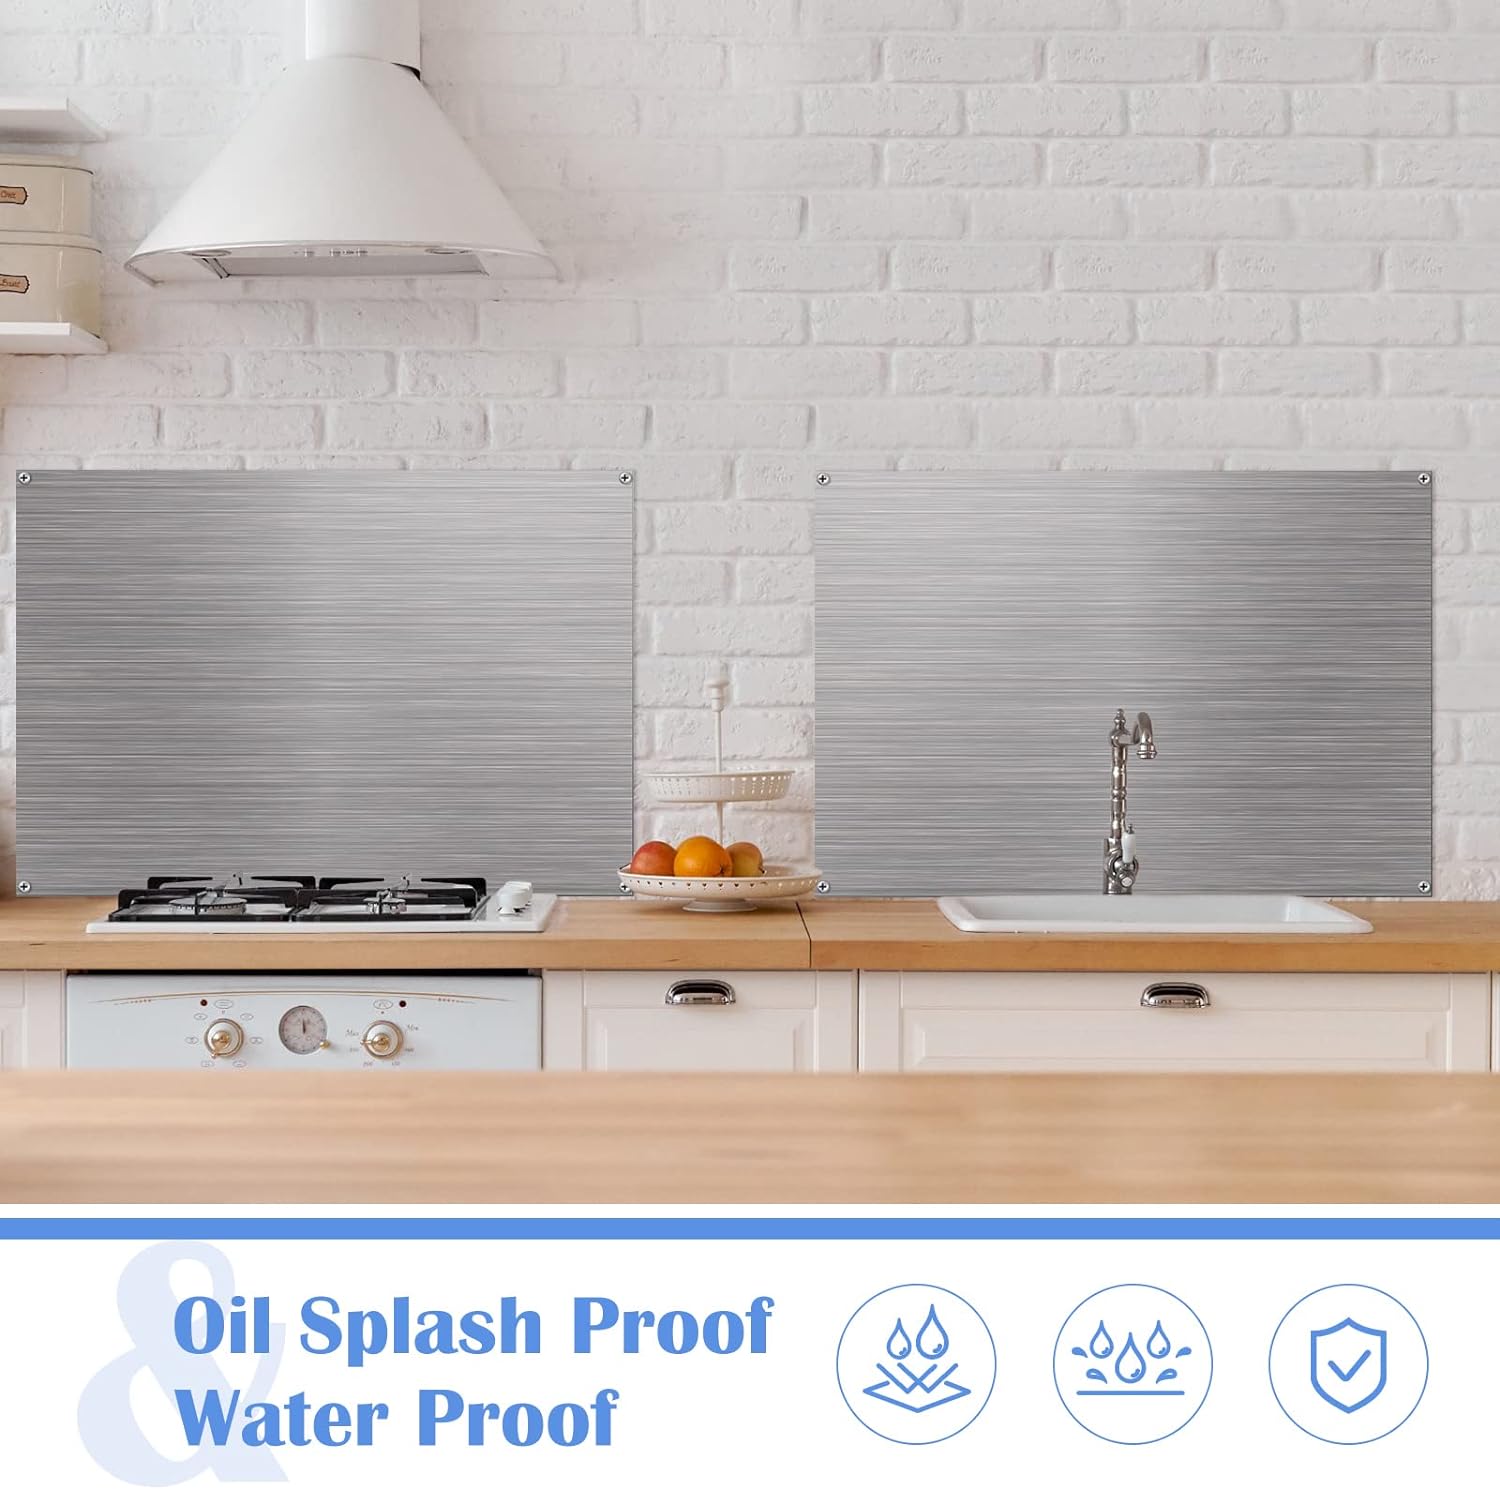 Zhengmy Zhengmy-Stainless_Steel-02 2 Pieces Stainless Steel Backsplash  Panel Double Sided Metal Sheet Backsplash Behind Stove 24 x 30 Inch Range  Hood Wall Shield